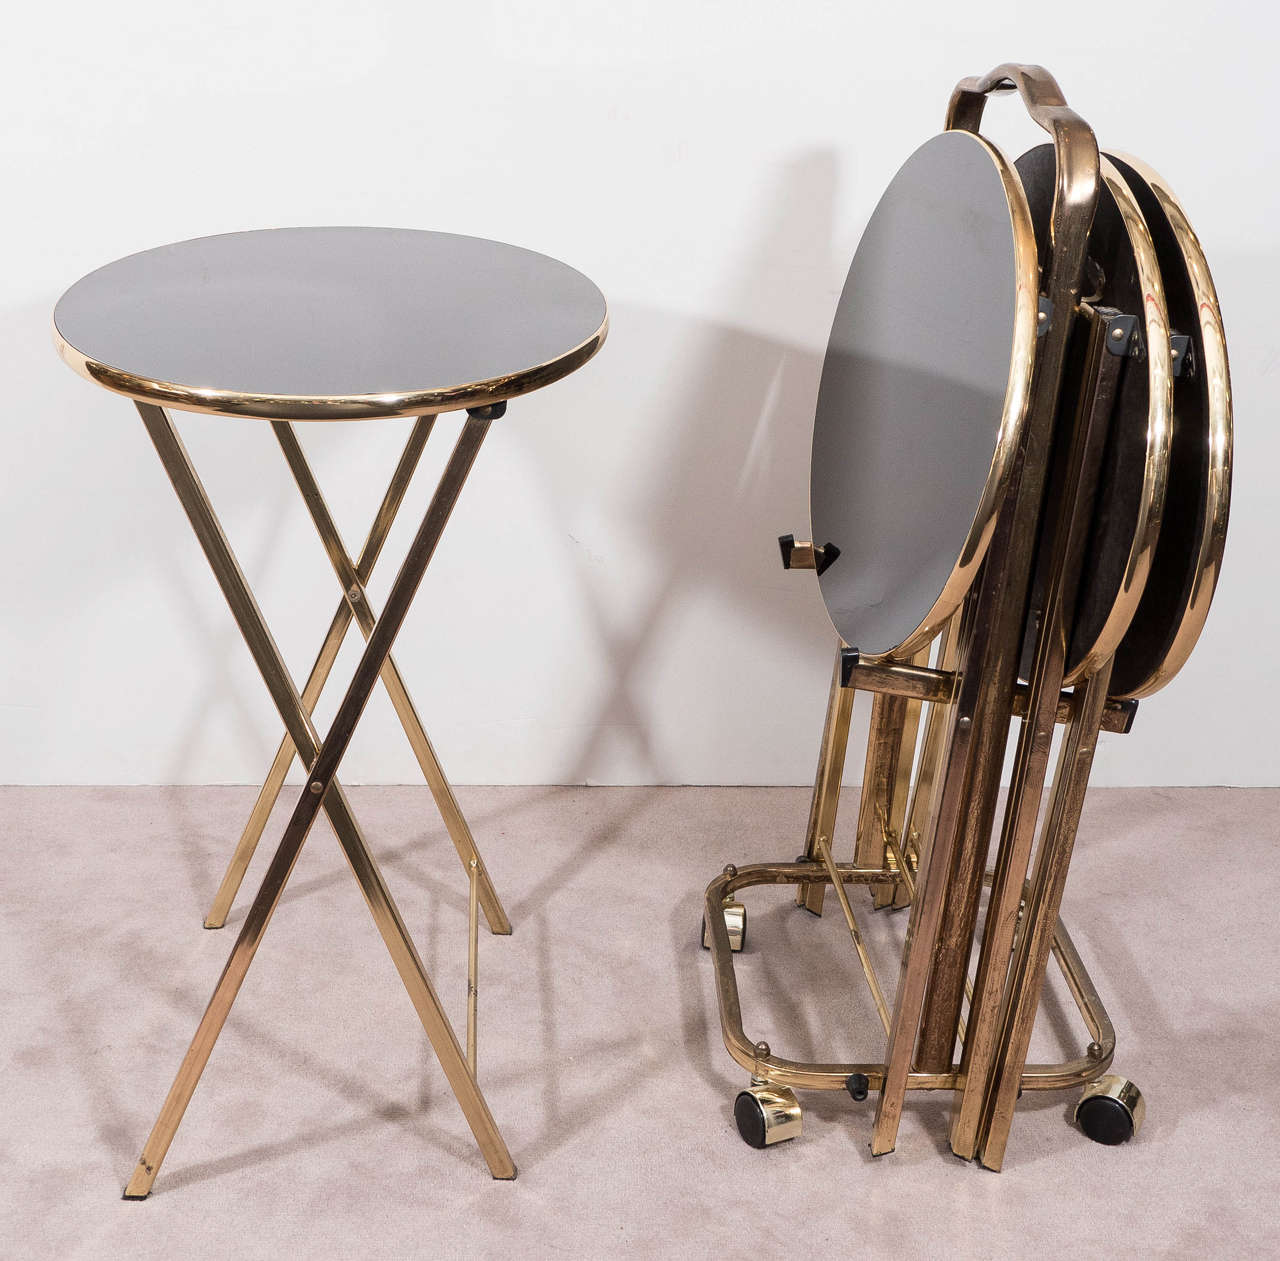 A vintage set of four dinner trays on a brass stand with casters, produced Midcentury in the Hollywood Regency style, each with glass tops in black, inset in brass frames on folding X-form legs and spreaders. Good vintage condition with age